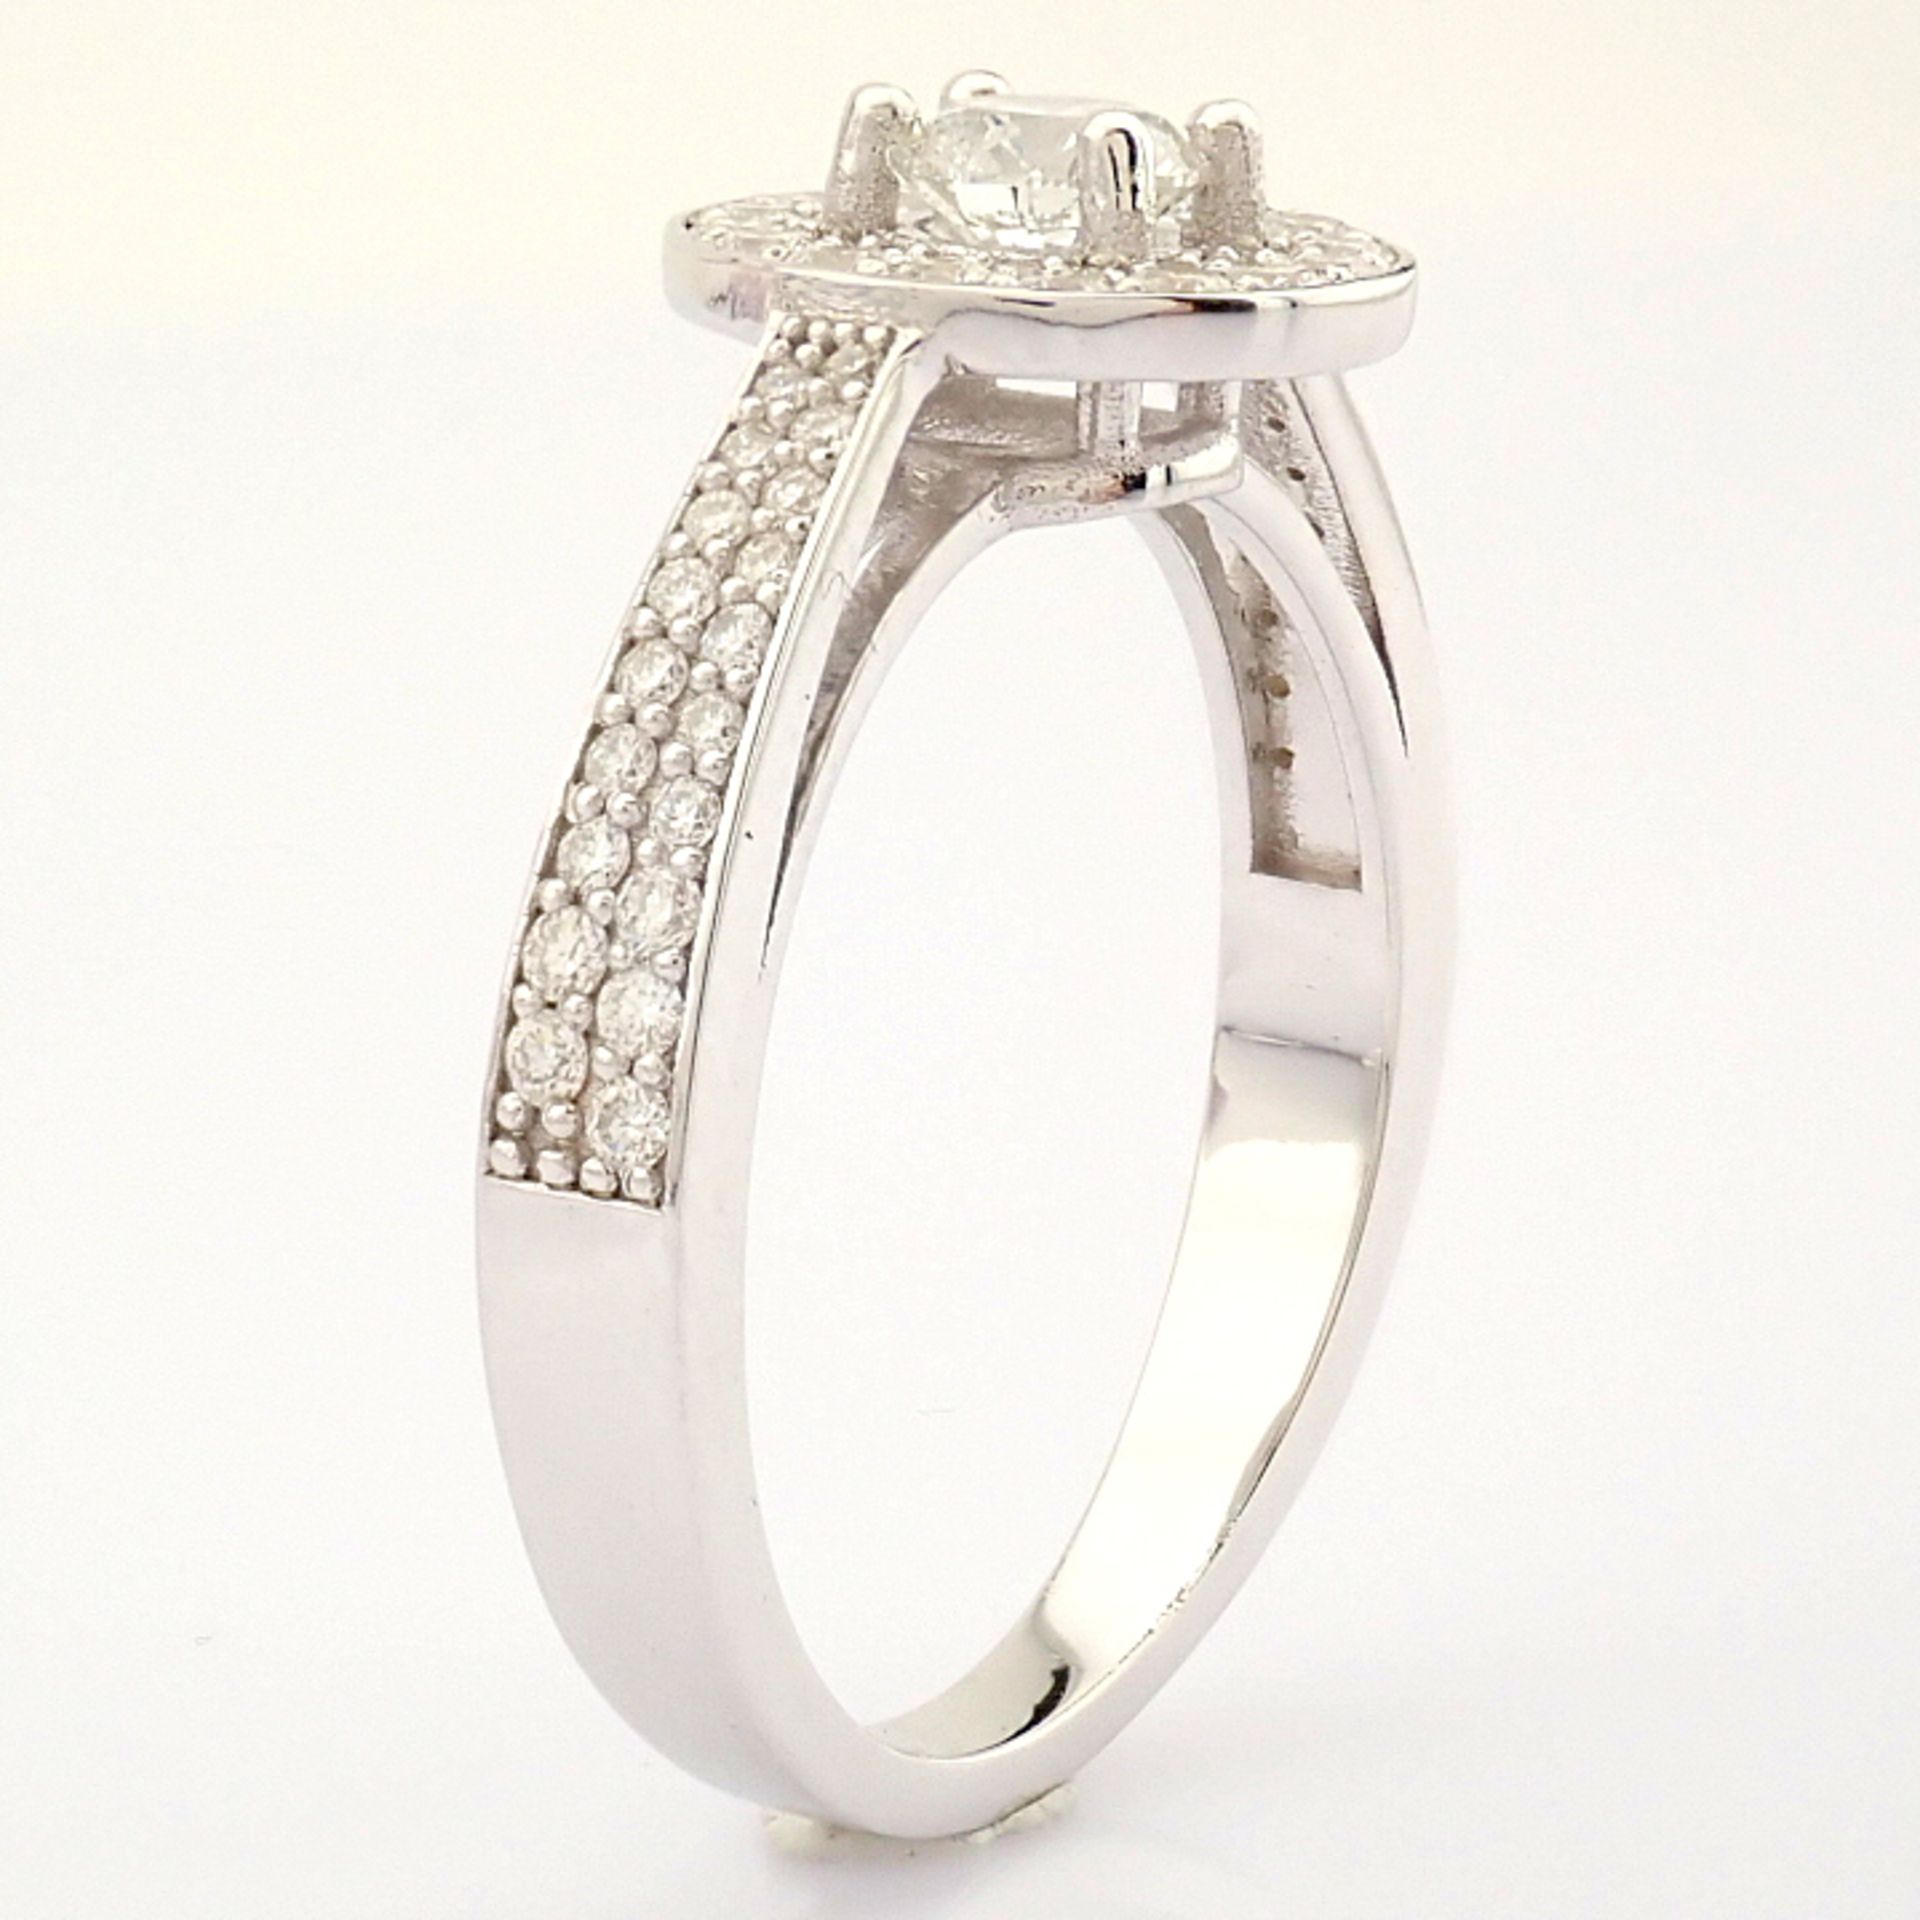 Certificated 18k White Gold Diamond Ring (Total 0.75 ct Stone) - Image 3 of 16